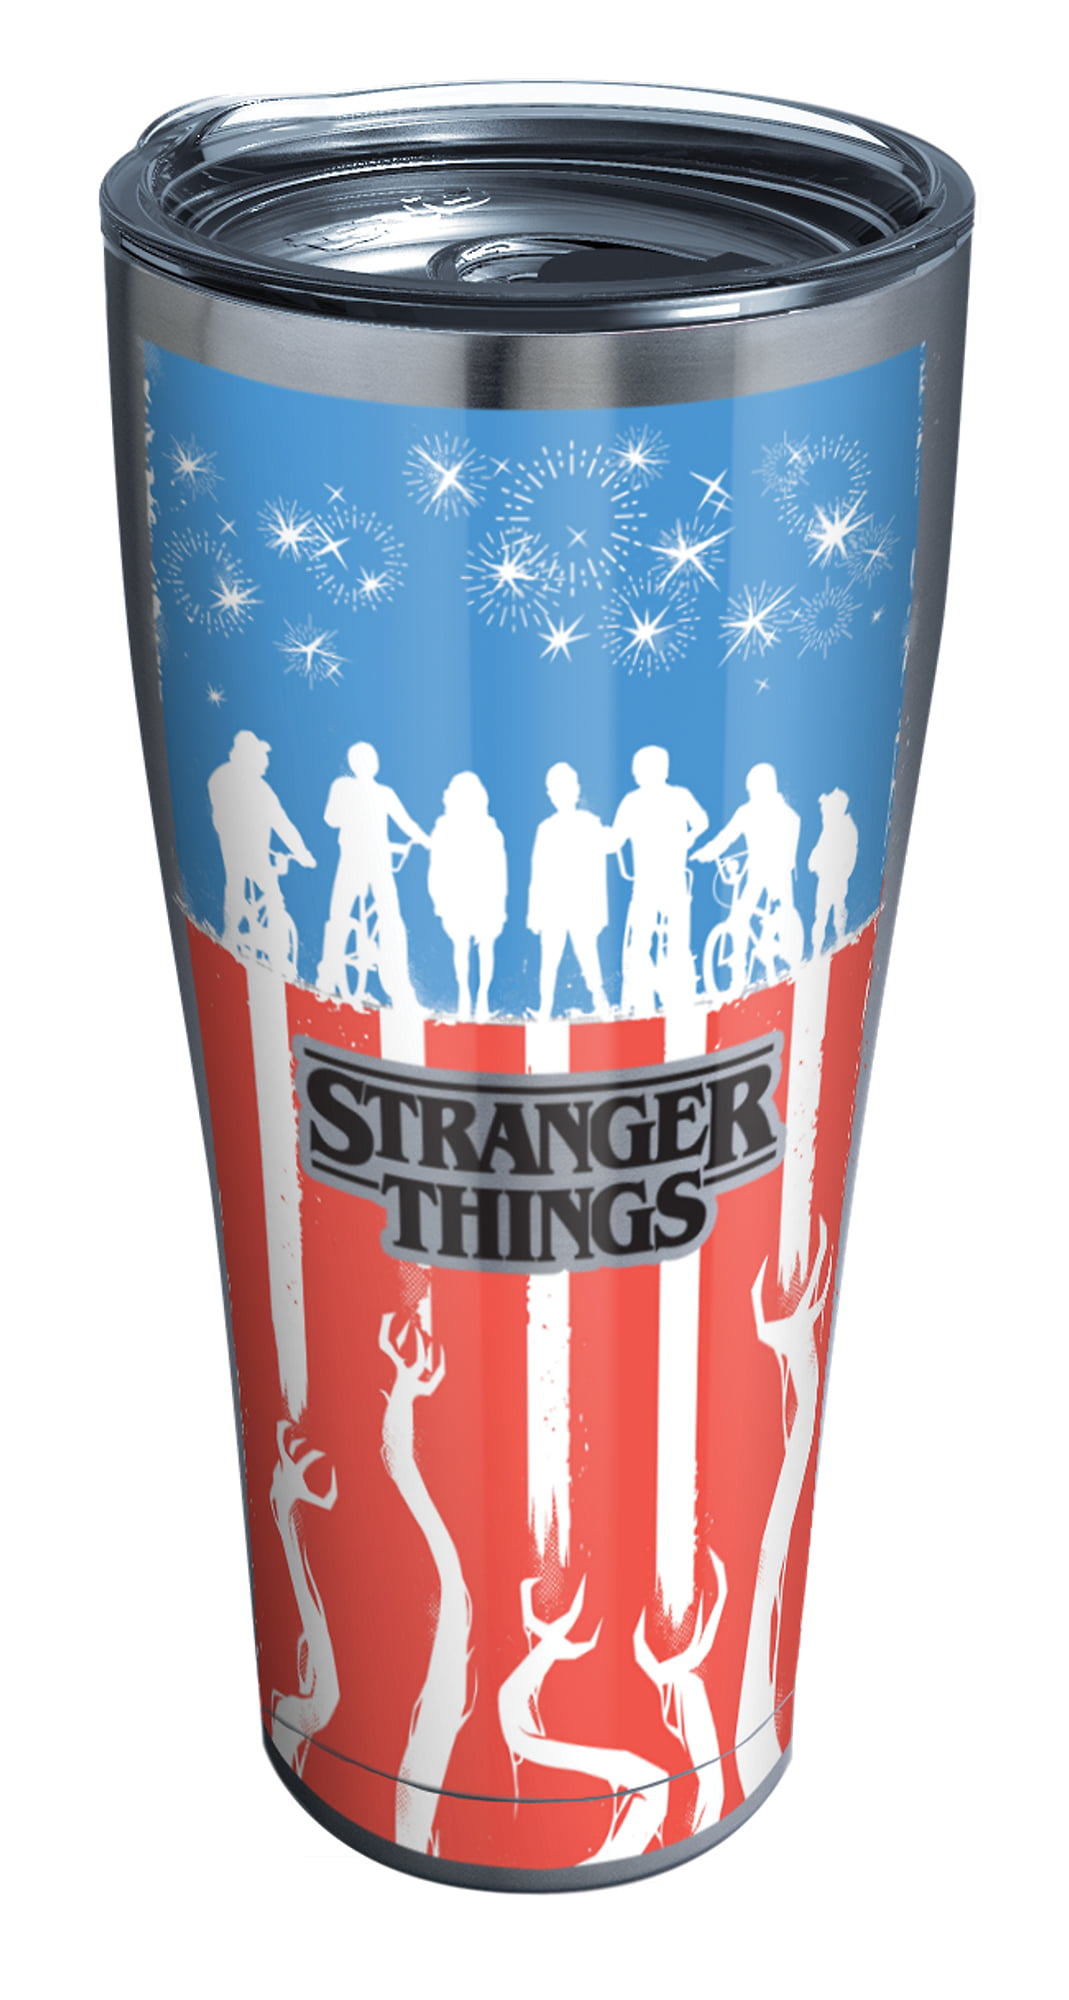 Tervis Triple Walled Stranger Things Insulated Tumbler Cup Keeps